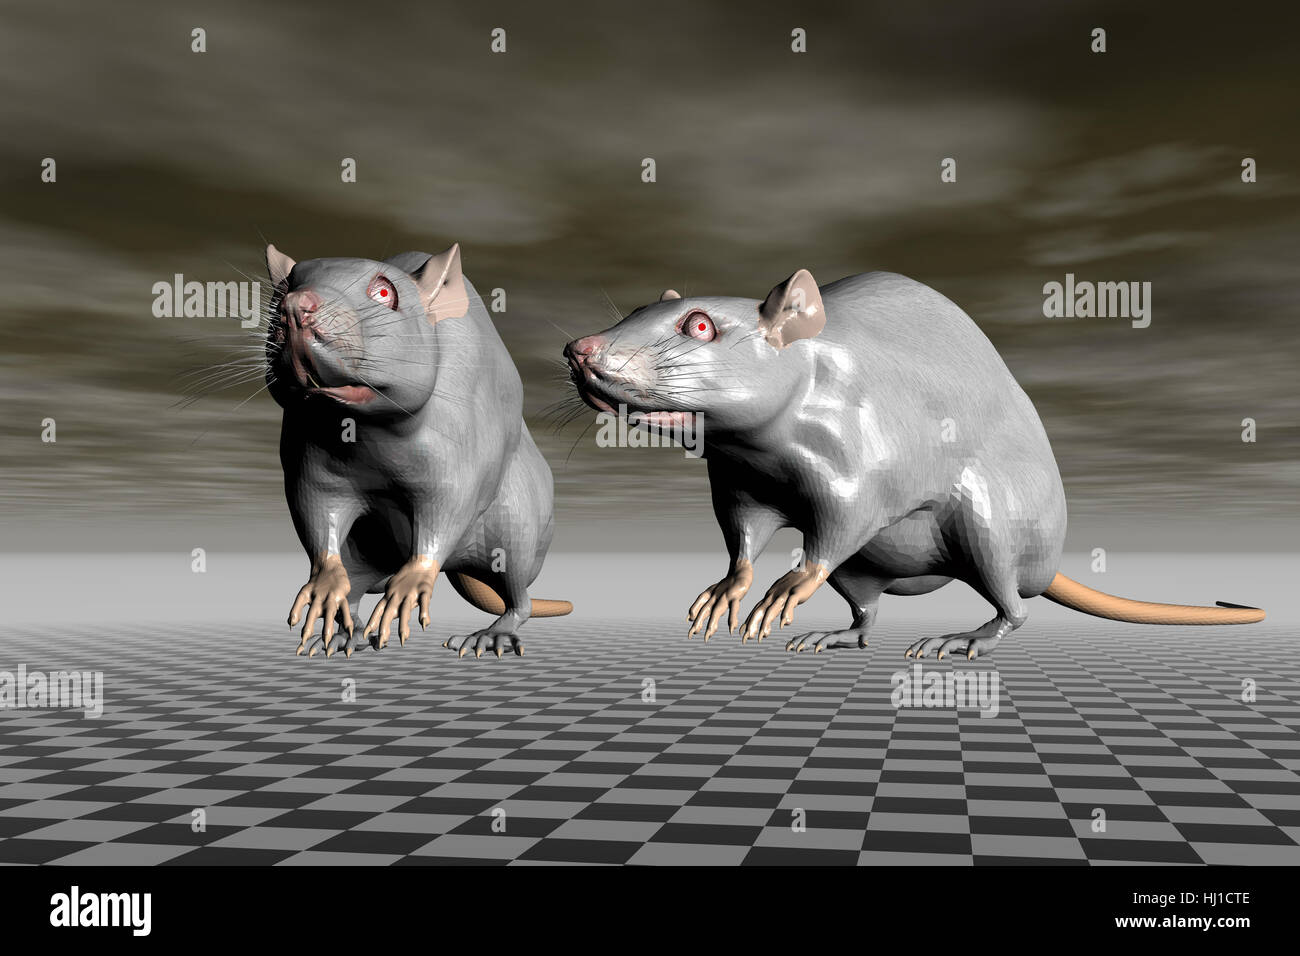 graphic, mouse, mice, rat, rats, two, graphic, black, swarthy, jetblack, deep Stock Photo